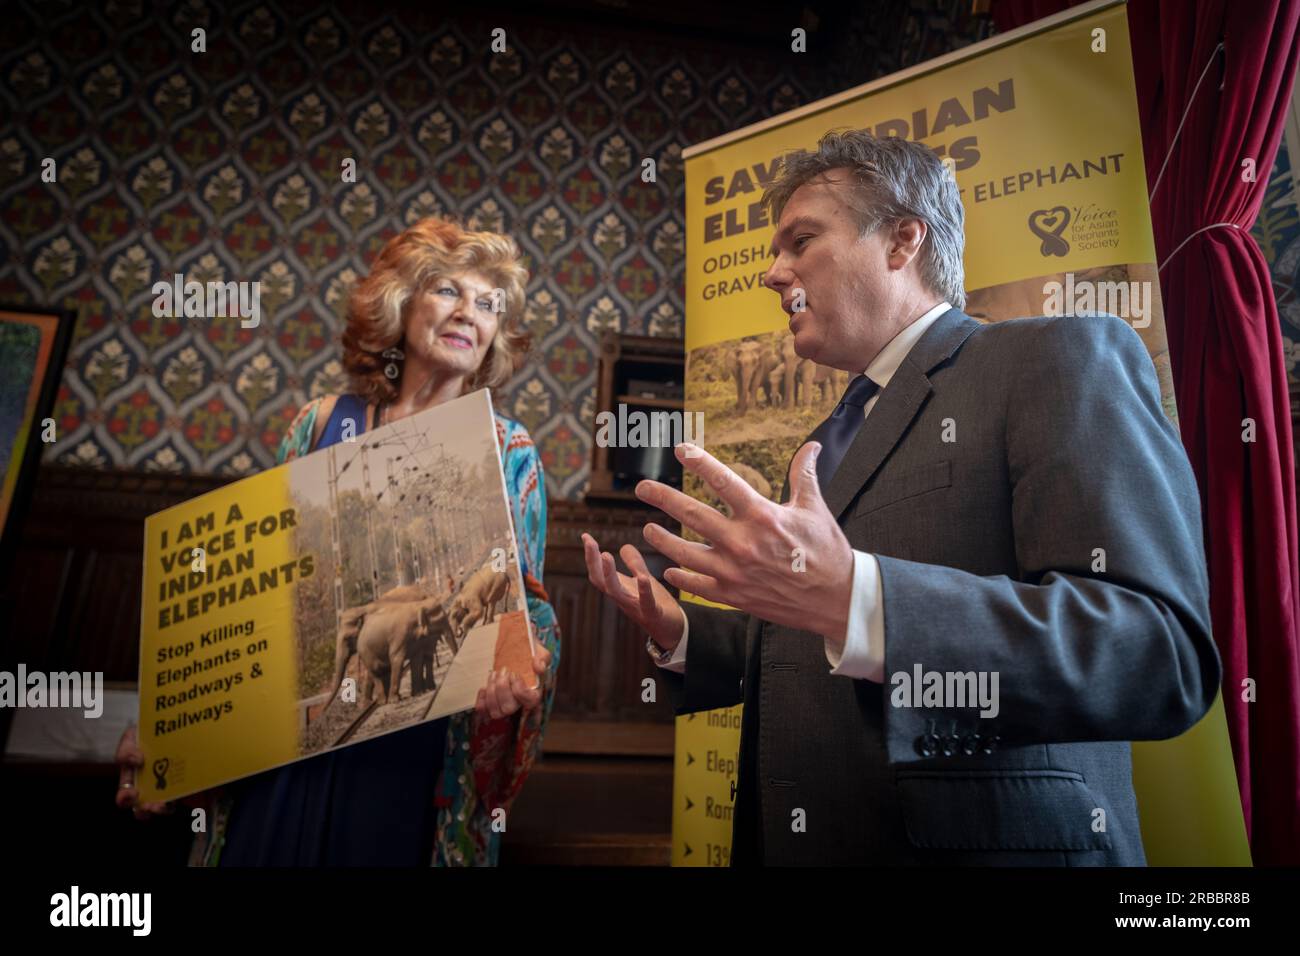 L-R actor Rula Lenska and MP Henry Smith show support on the Asian elephant crisis. Westminster, London, UK Stock Photo